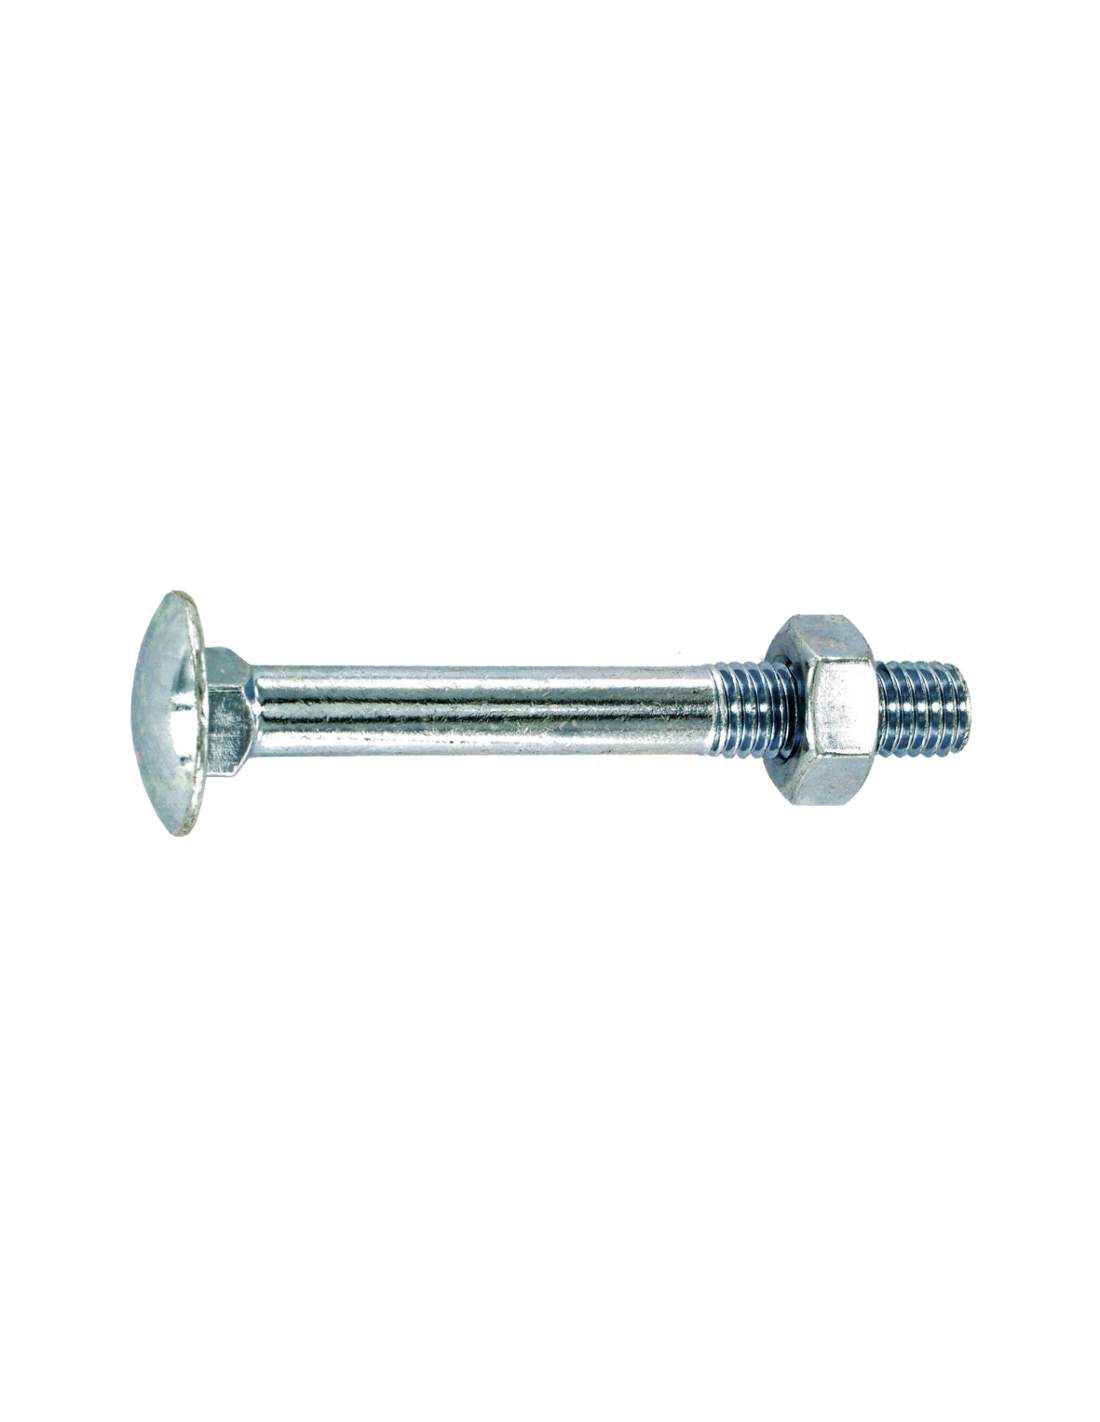 Round head bolt with square collar in galvanized steel 6x50mm, 5 pcs.